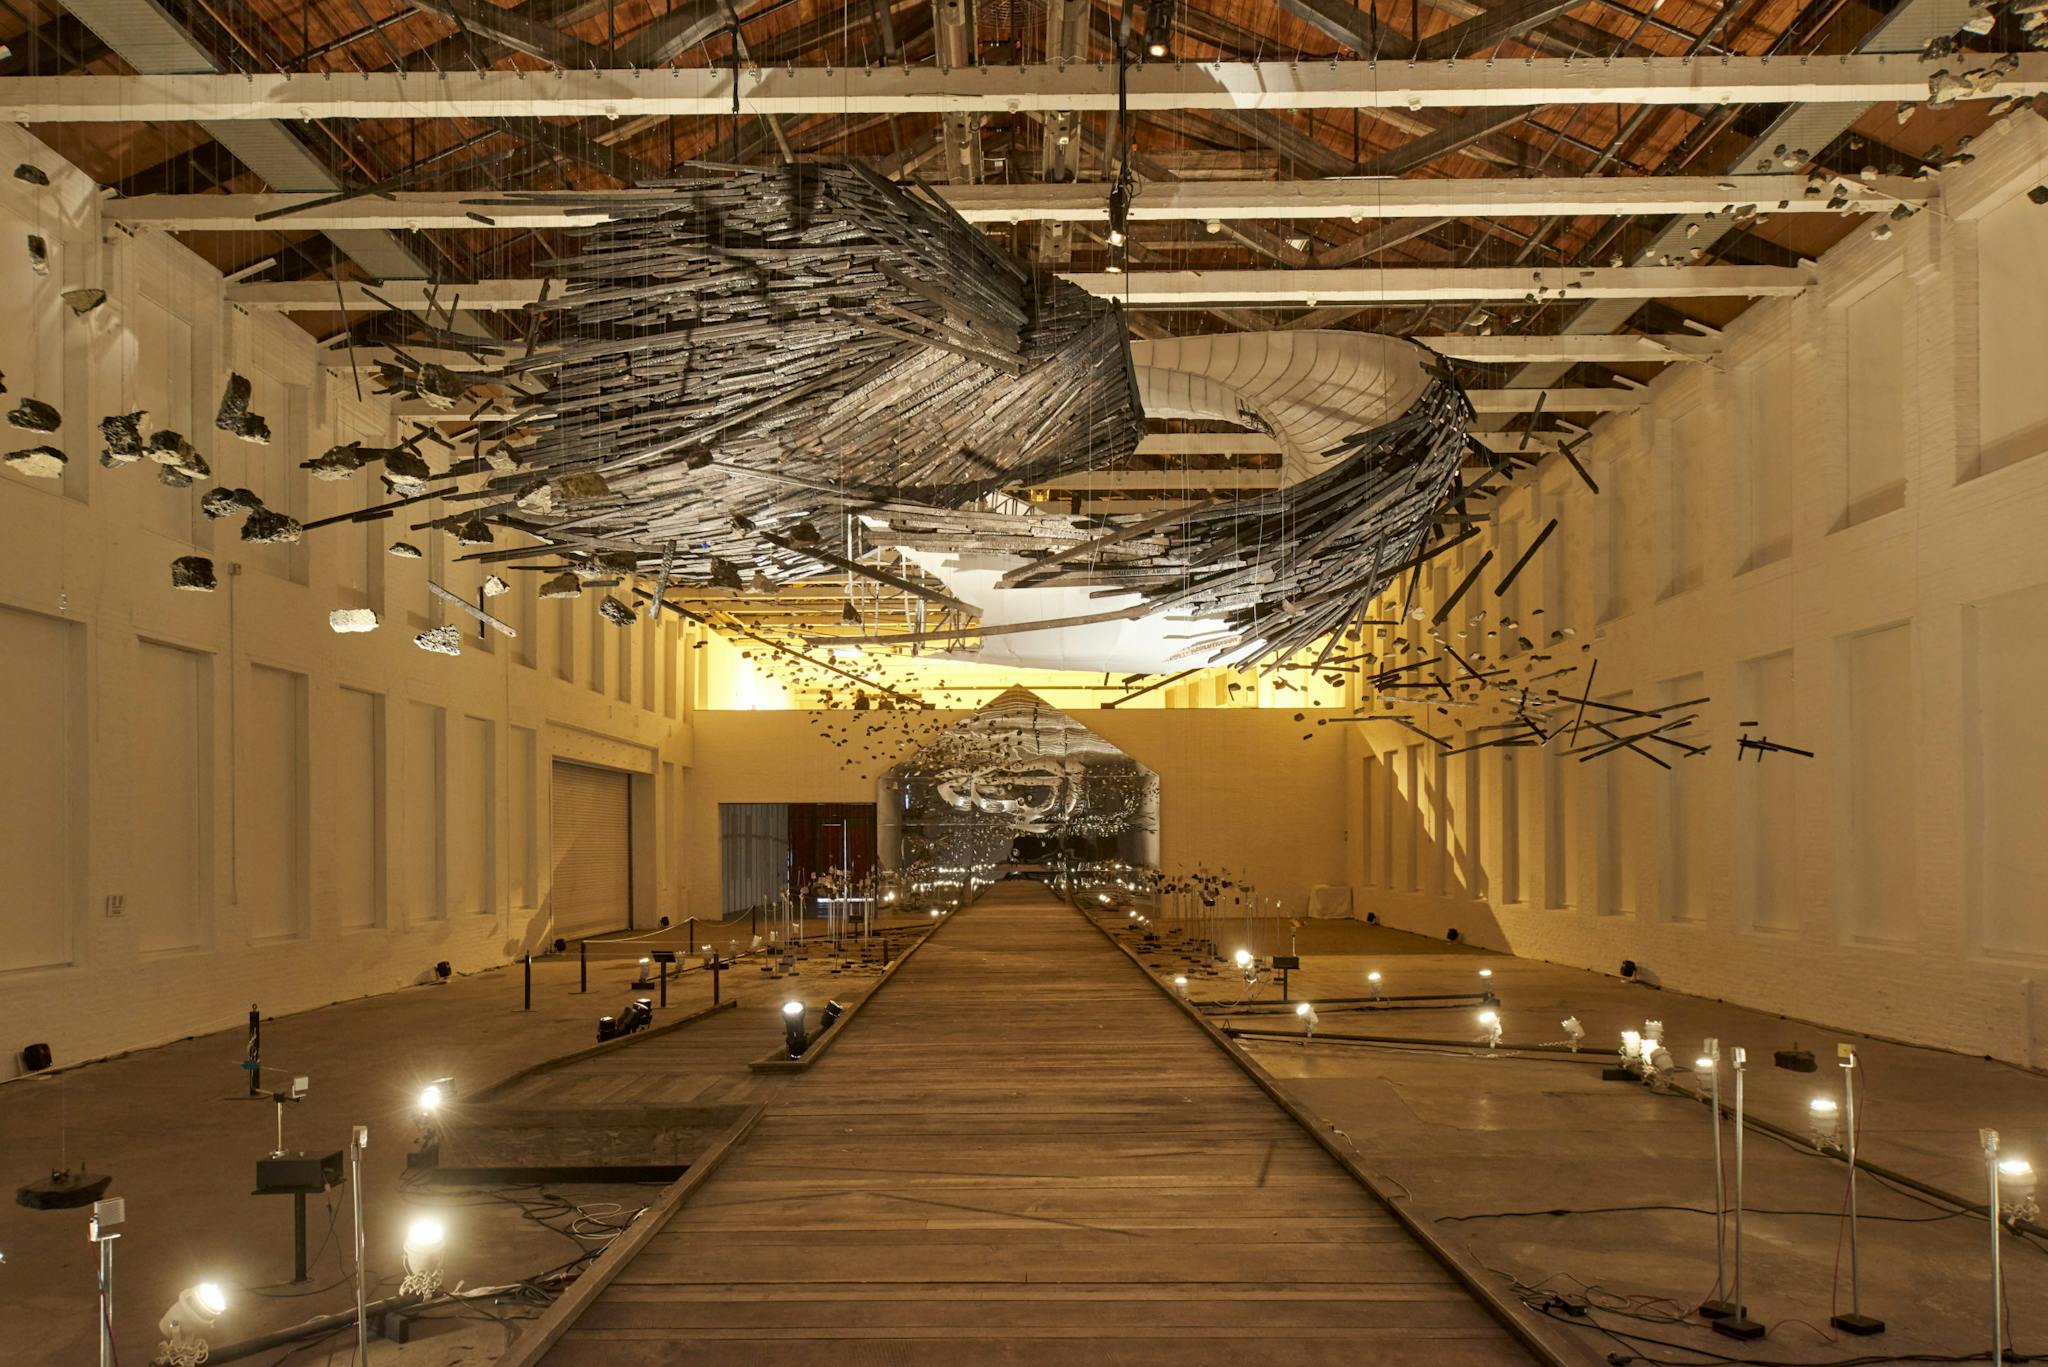 Glenn Kaino's installation displayed in a room with a wooden floor, hanging sculptural work, and a series of lights.